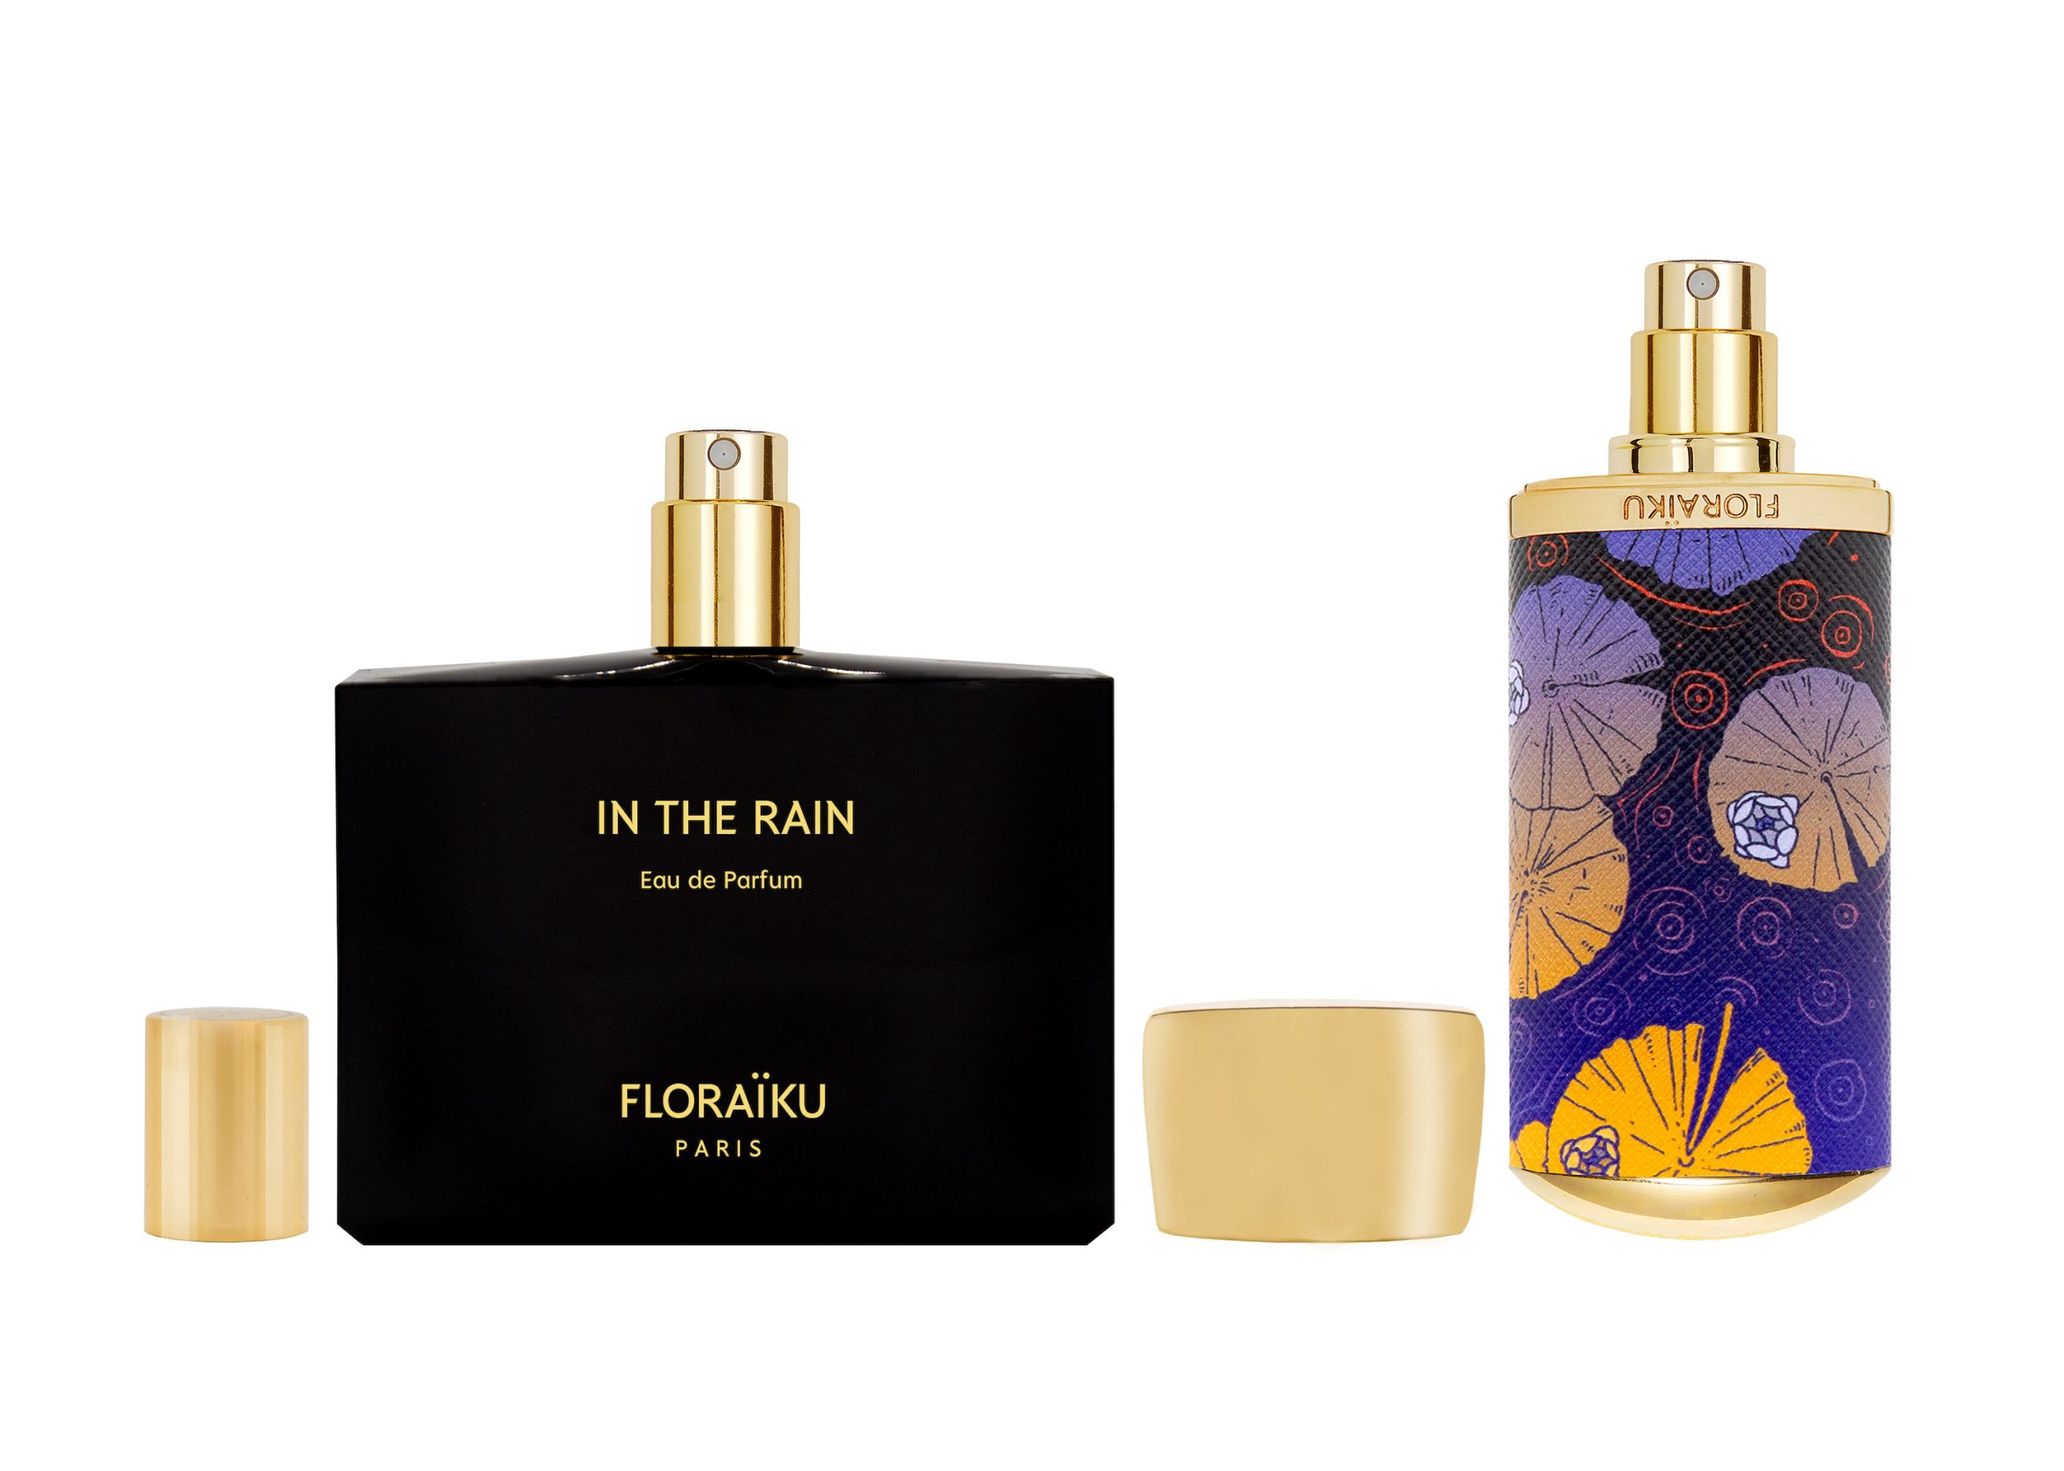 J-Beauty report from Europe Vol. 10: a poetic story of Floraïku Paris spun with haiku and scent